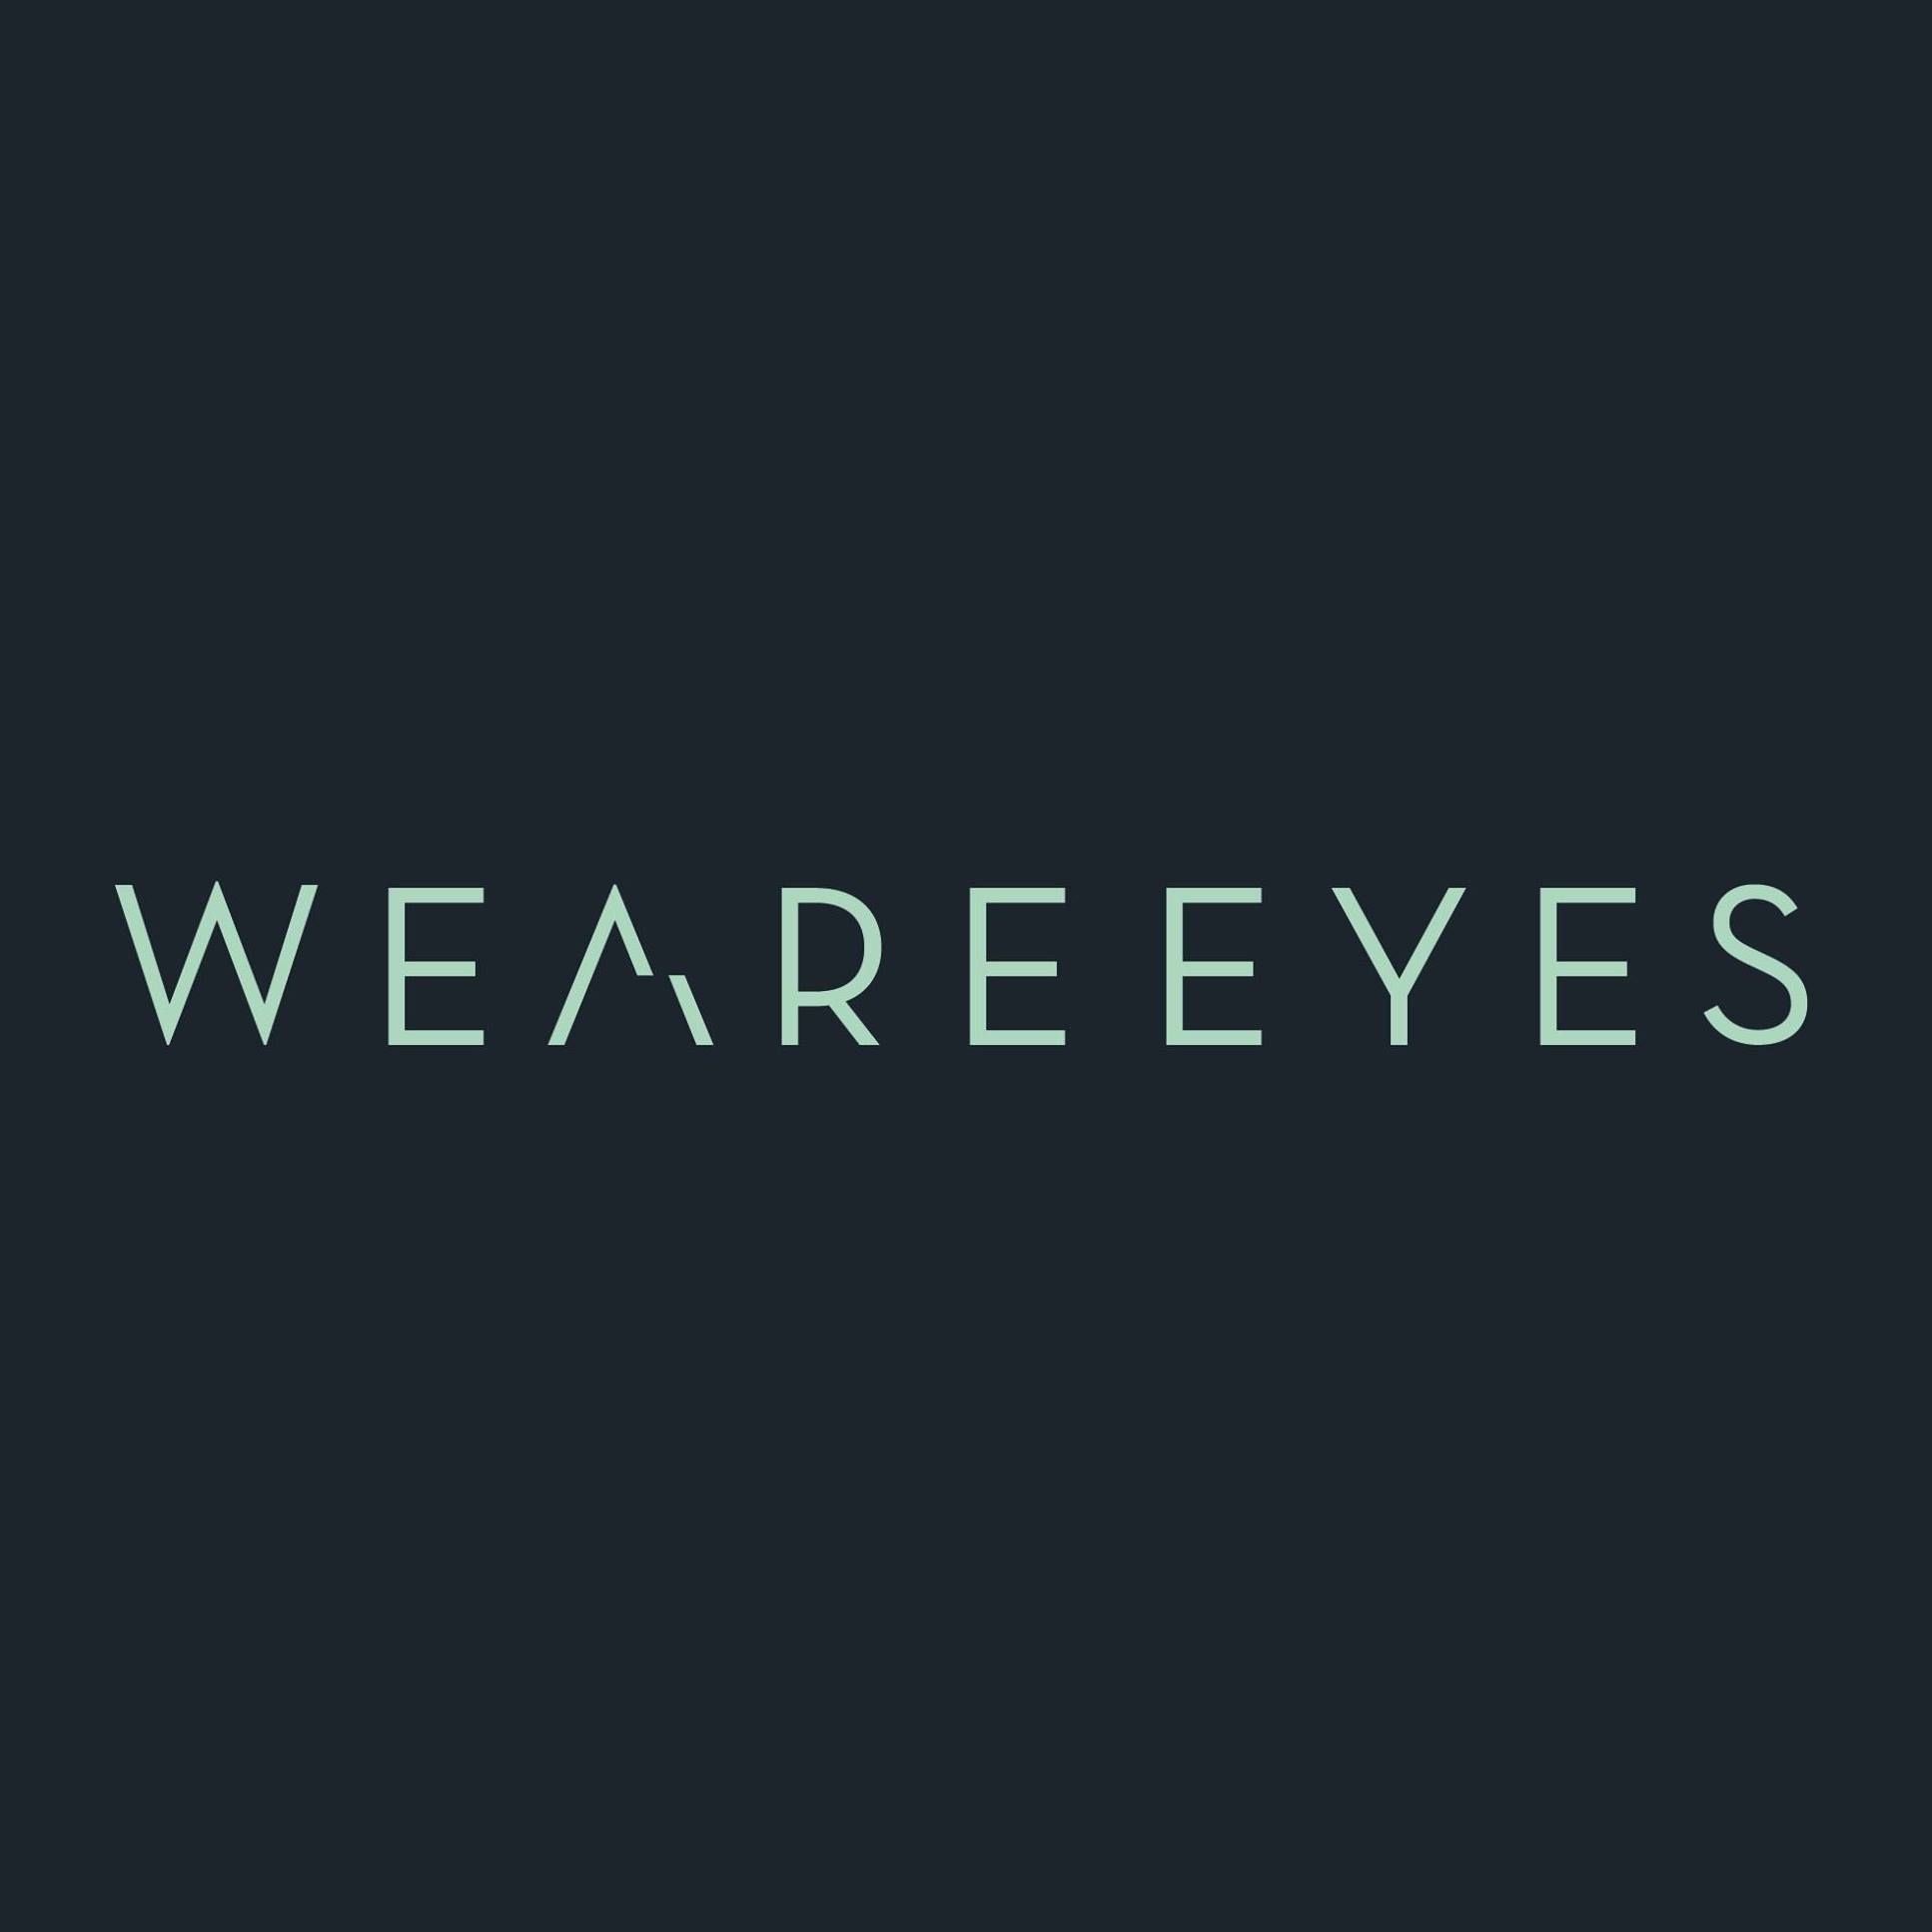 WE ARE EYES